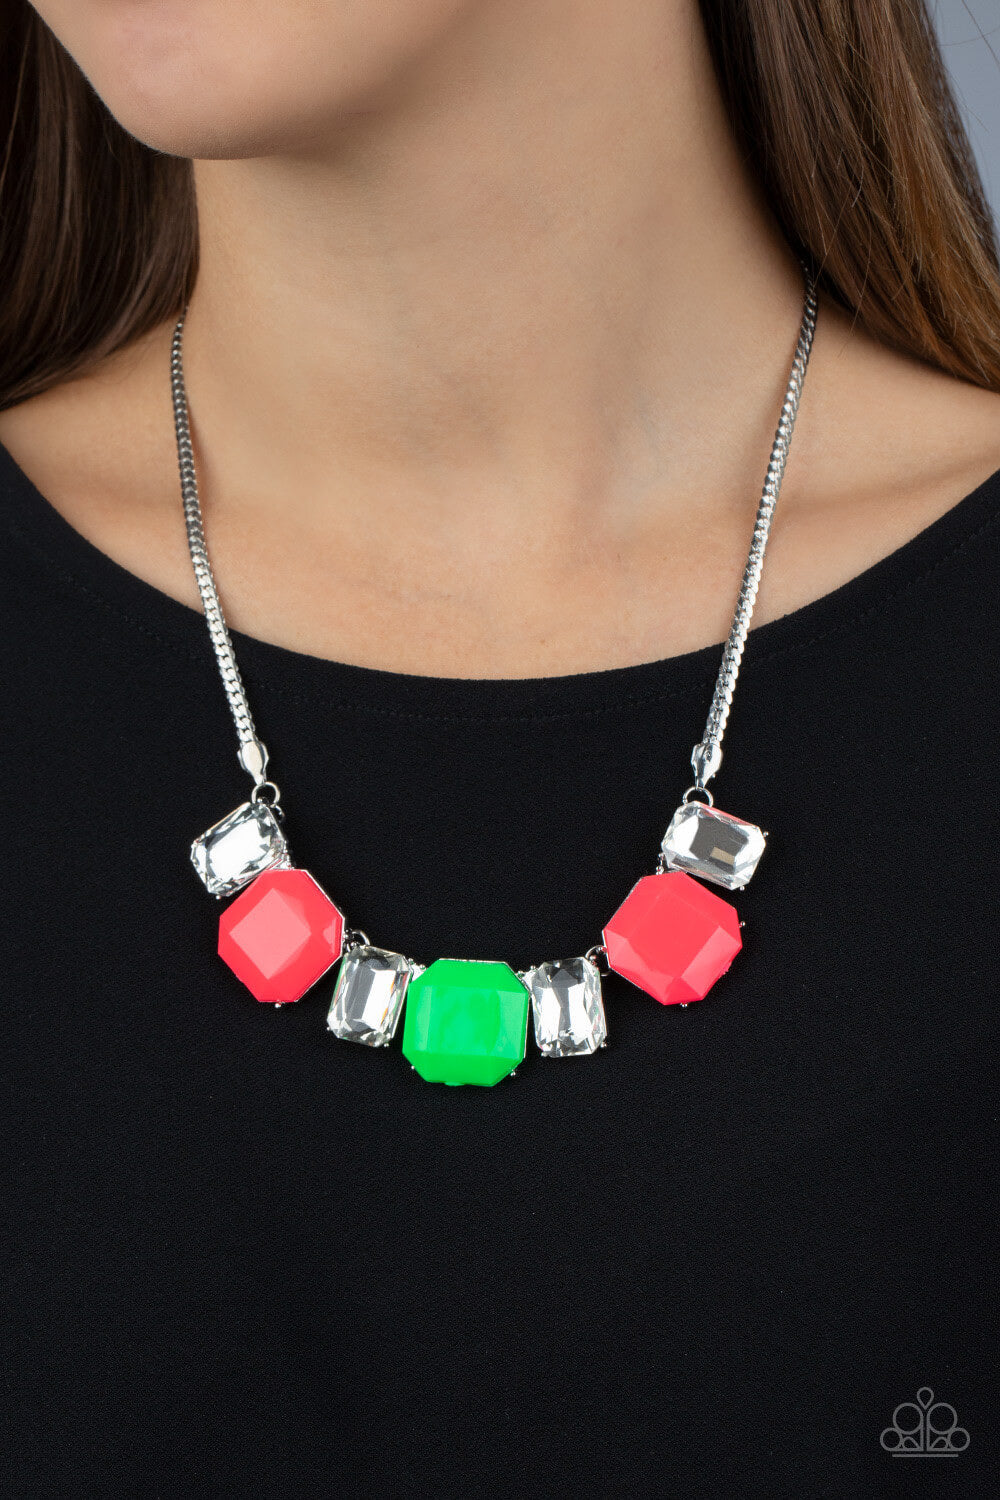 Paparazzi “Royal Crest” Neon Pink and Green Statement Necklace